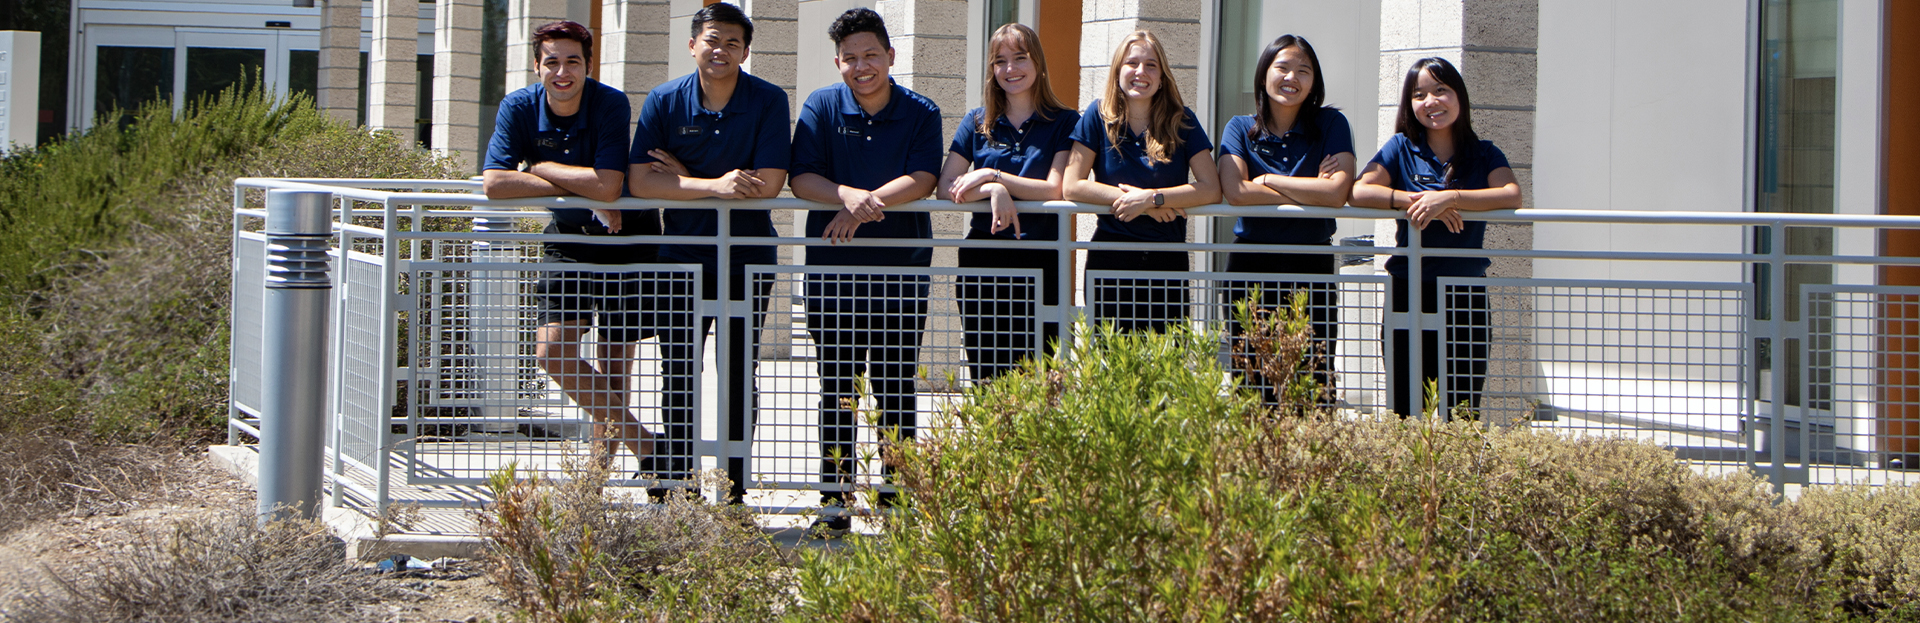 Students pose for a photo wearing matching navy blue polo shirts